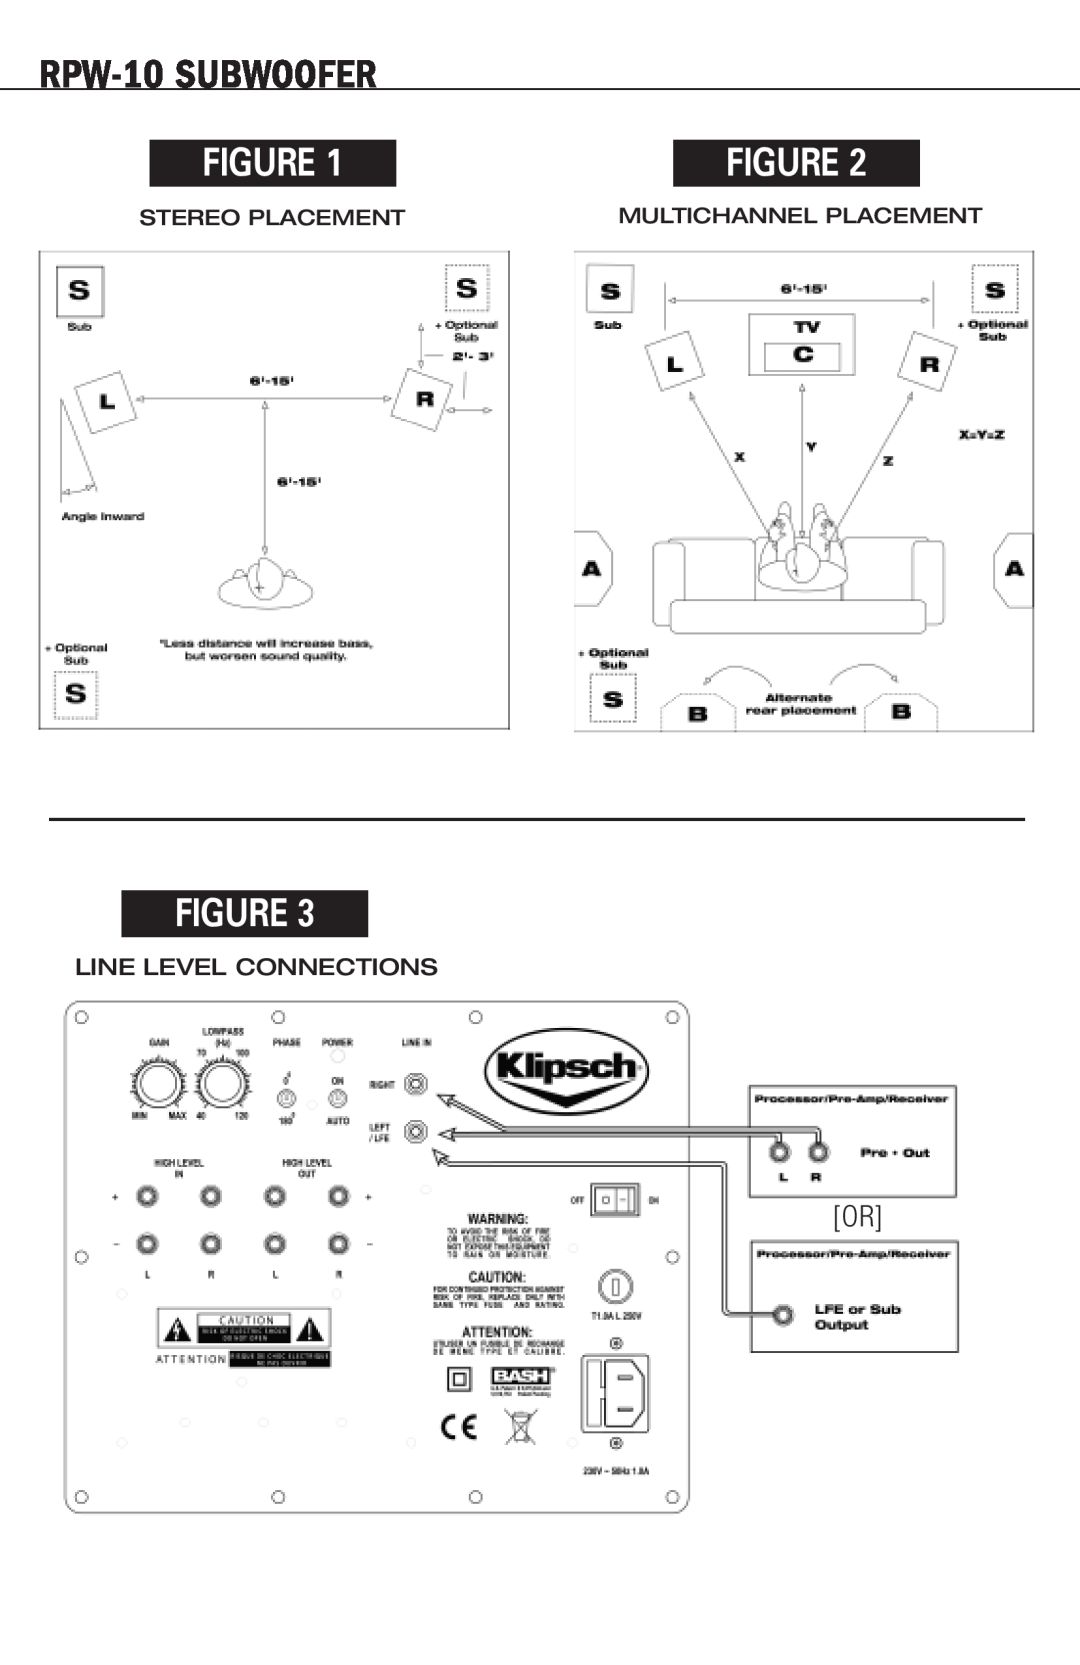 Klipsch manual Stereo Placement, Multichannel Placement, Line Level Connections, RPW-10SUBWOOFER 